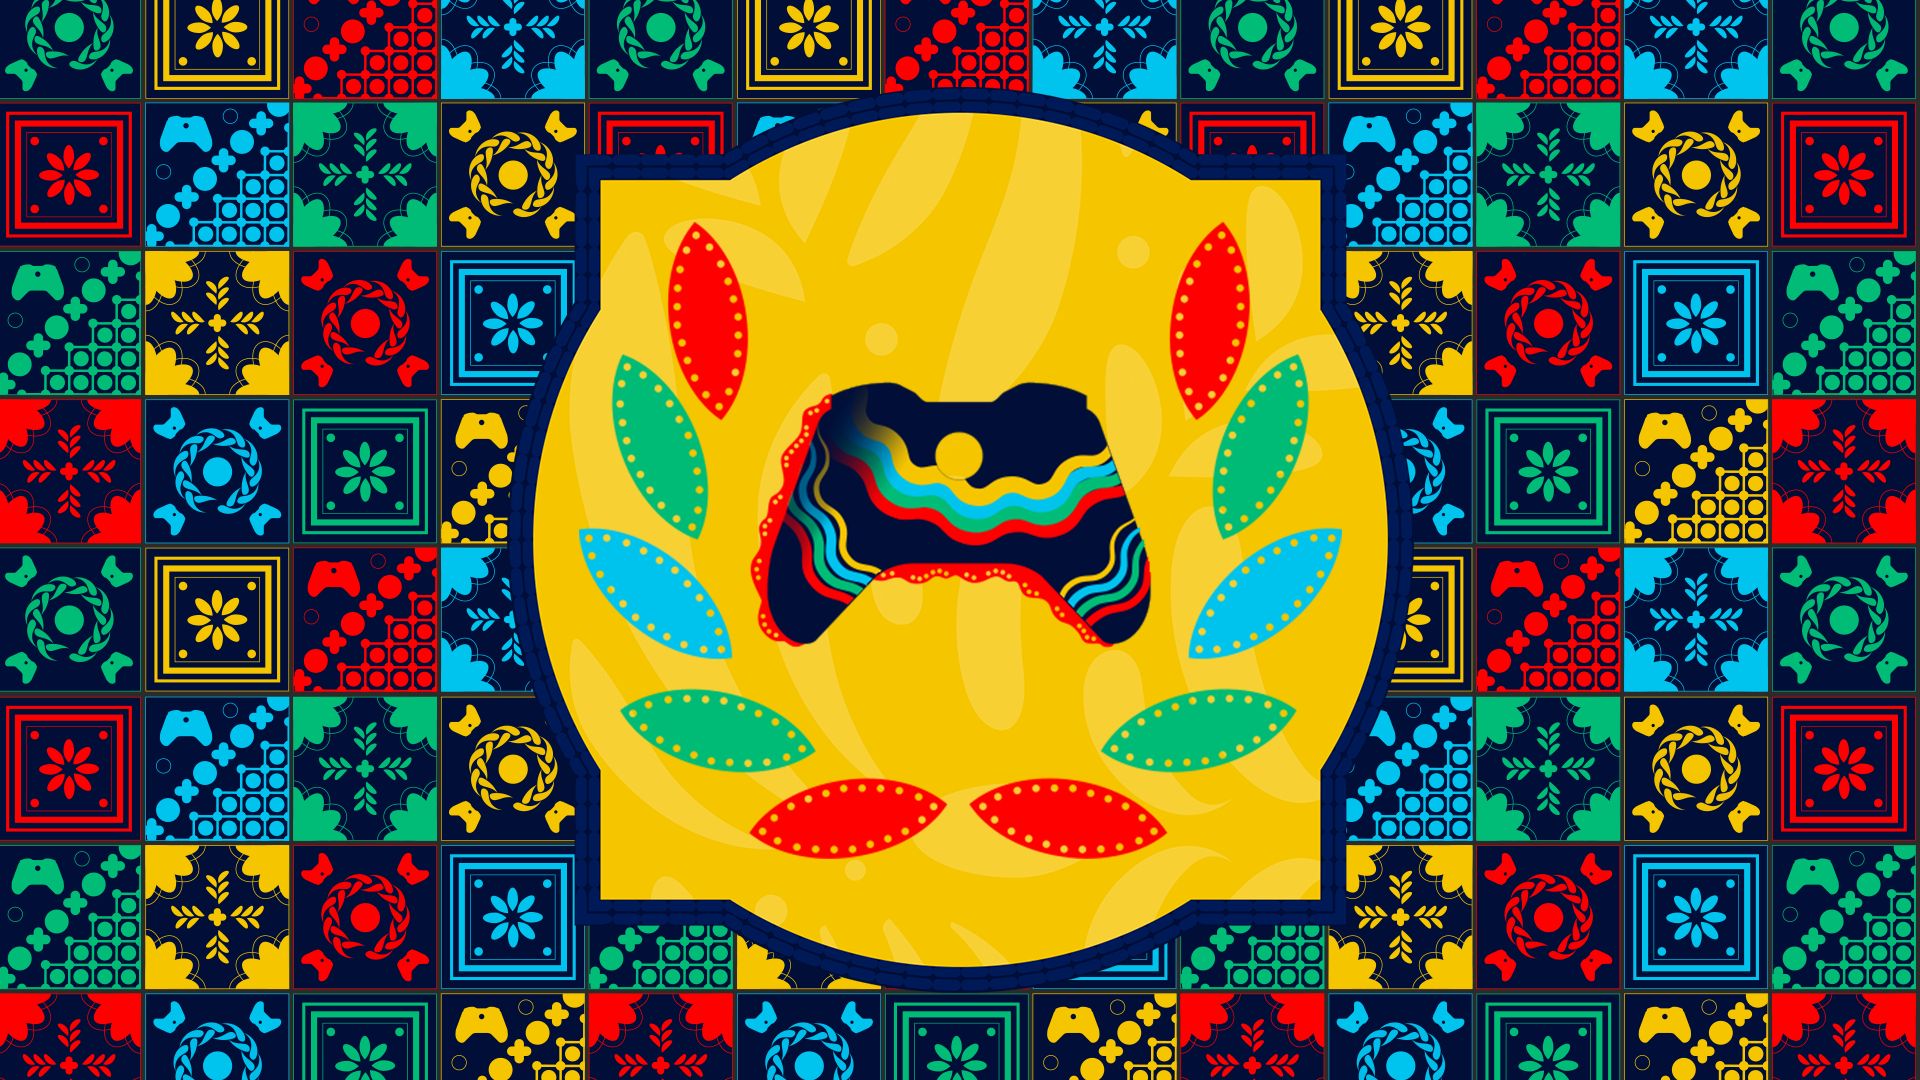 Xbox Ambassadors logo featuring the ruffles and lace of a folklórico dress on a background of red, blue, green, and yellow gamer-themed tiles.